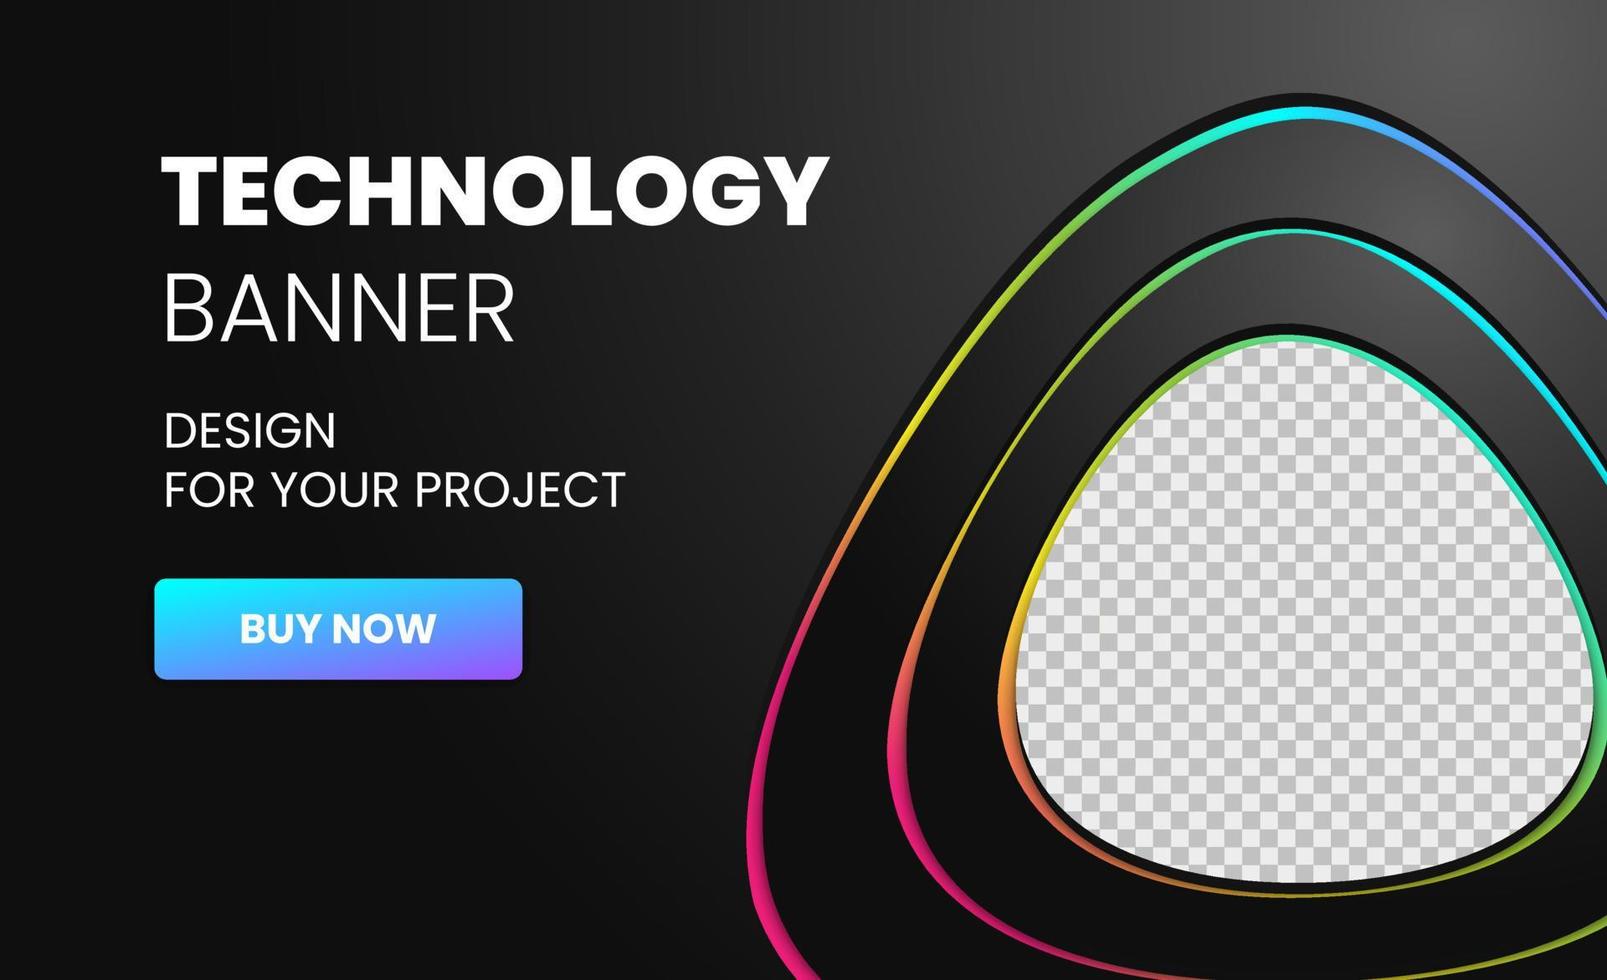 Modern technology banner in geometry style. Futuristic hi-tech colorful background. Vector illustration. Dynamic neon rainbow line abstractions for typography, design frame for social media post.